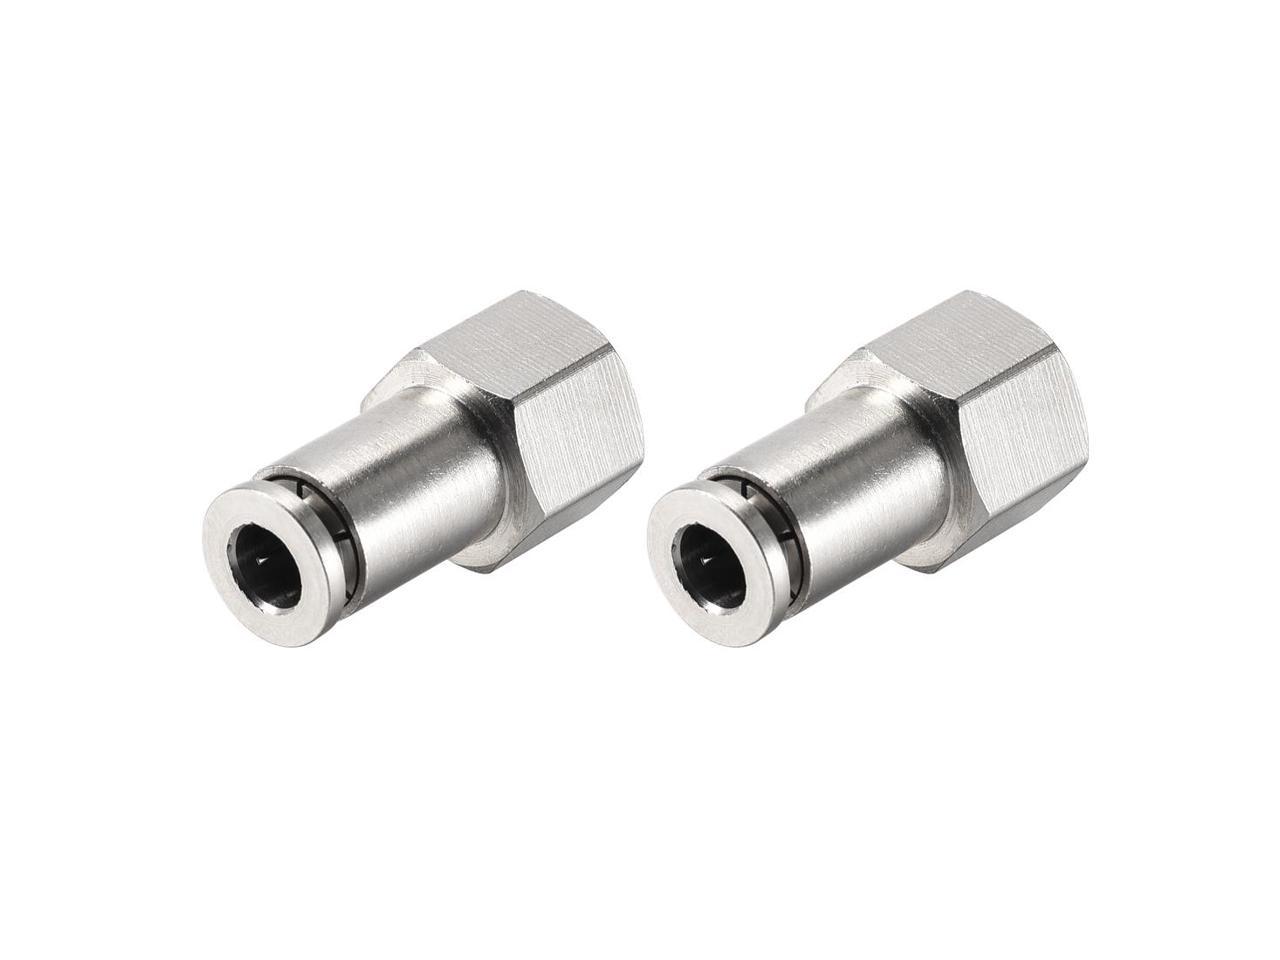 Push to Connect Tube Fitting Adapter 6mm OD x 1/4 NPT Straight Connecter 2pcs 